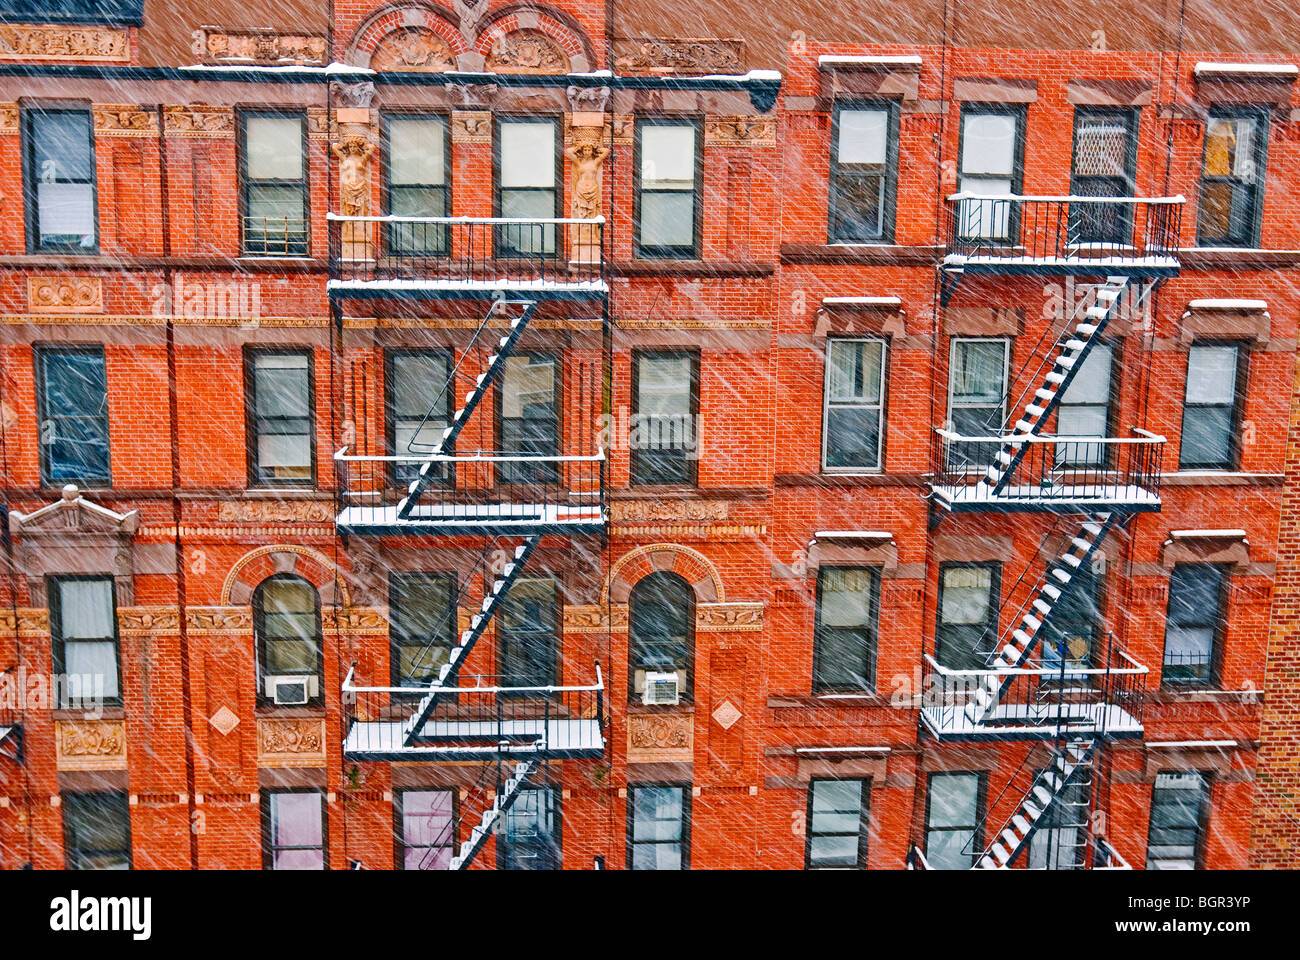 Tenement apartment buildings in New York City during winter snowstorm. Stock Photo